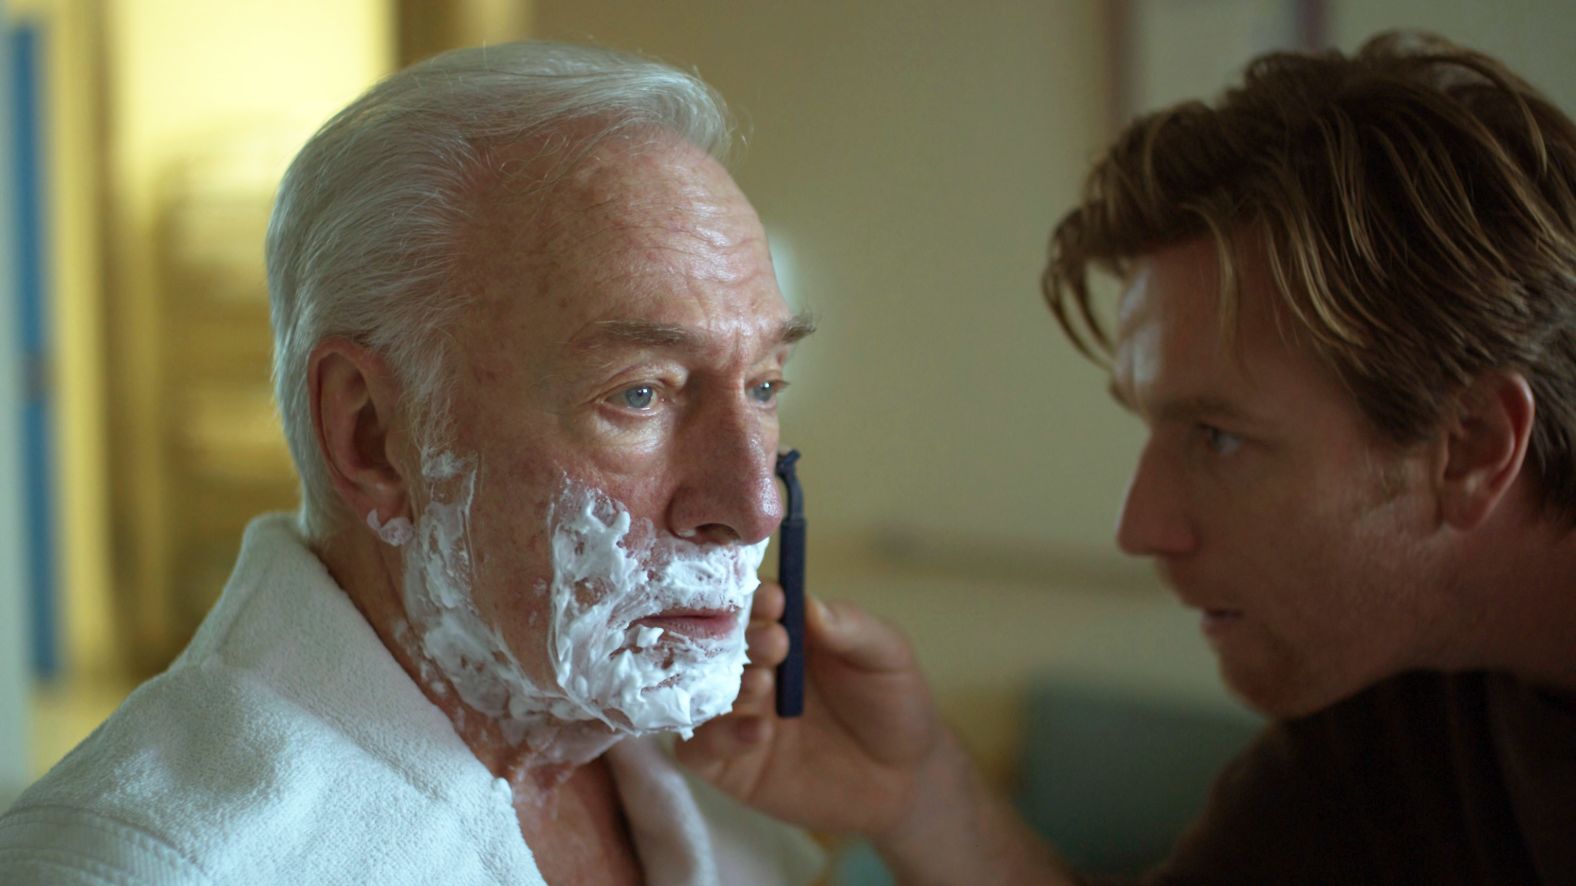 Plummer appears with Ewan McGregor in the 2010 film "Beginners." He won the Academy Award for best supporting actor.